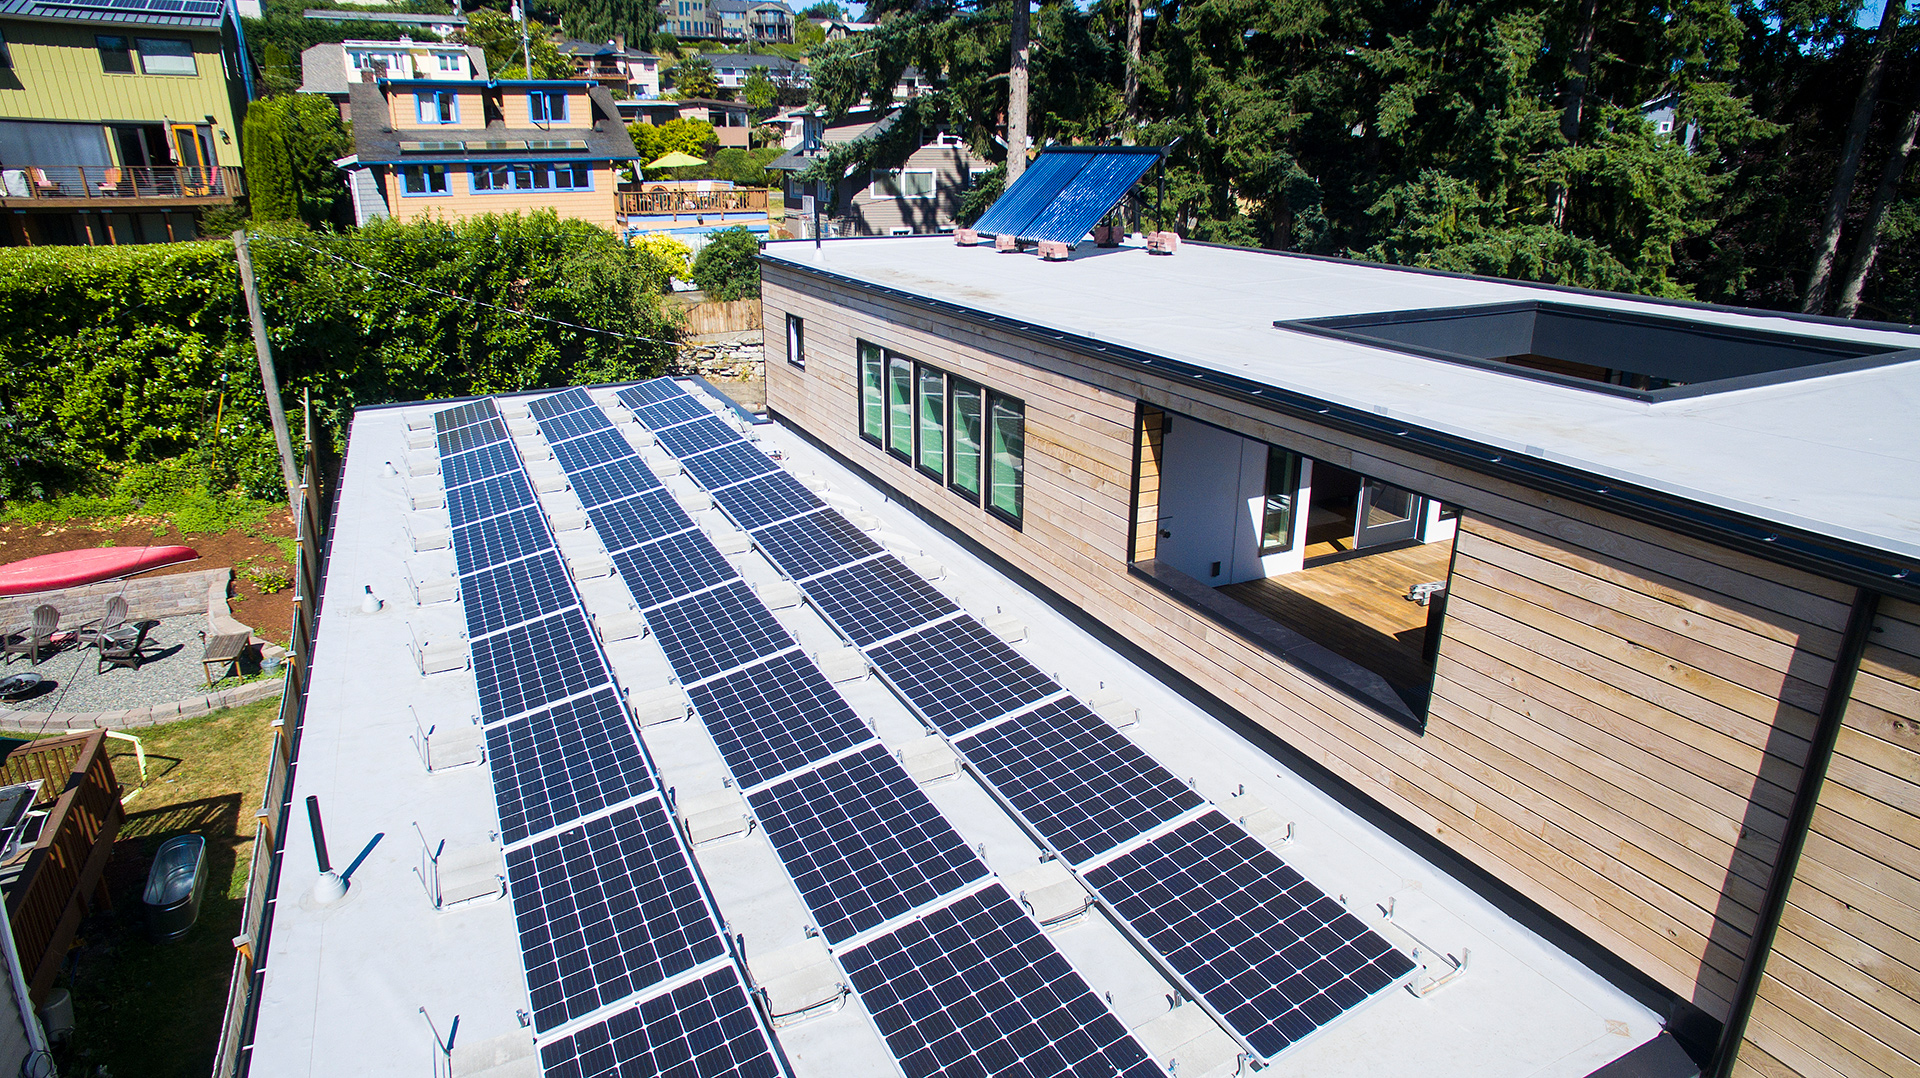 Dwell Development home with solar panels on roof